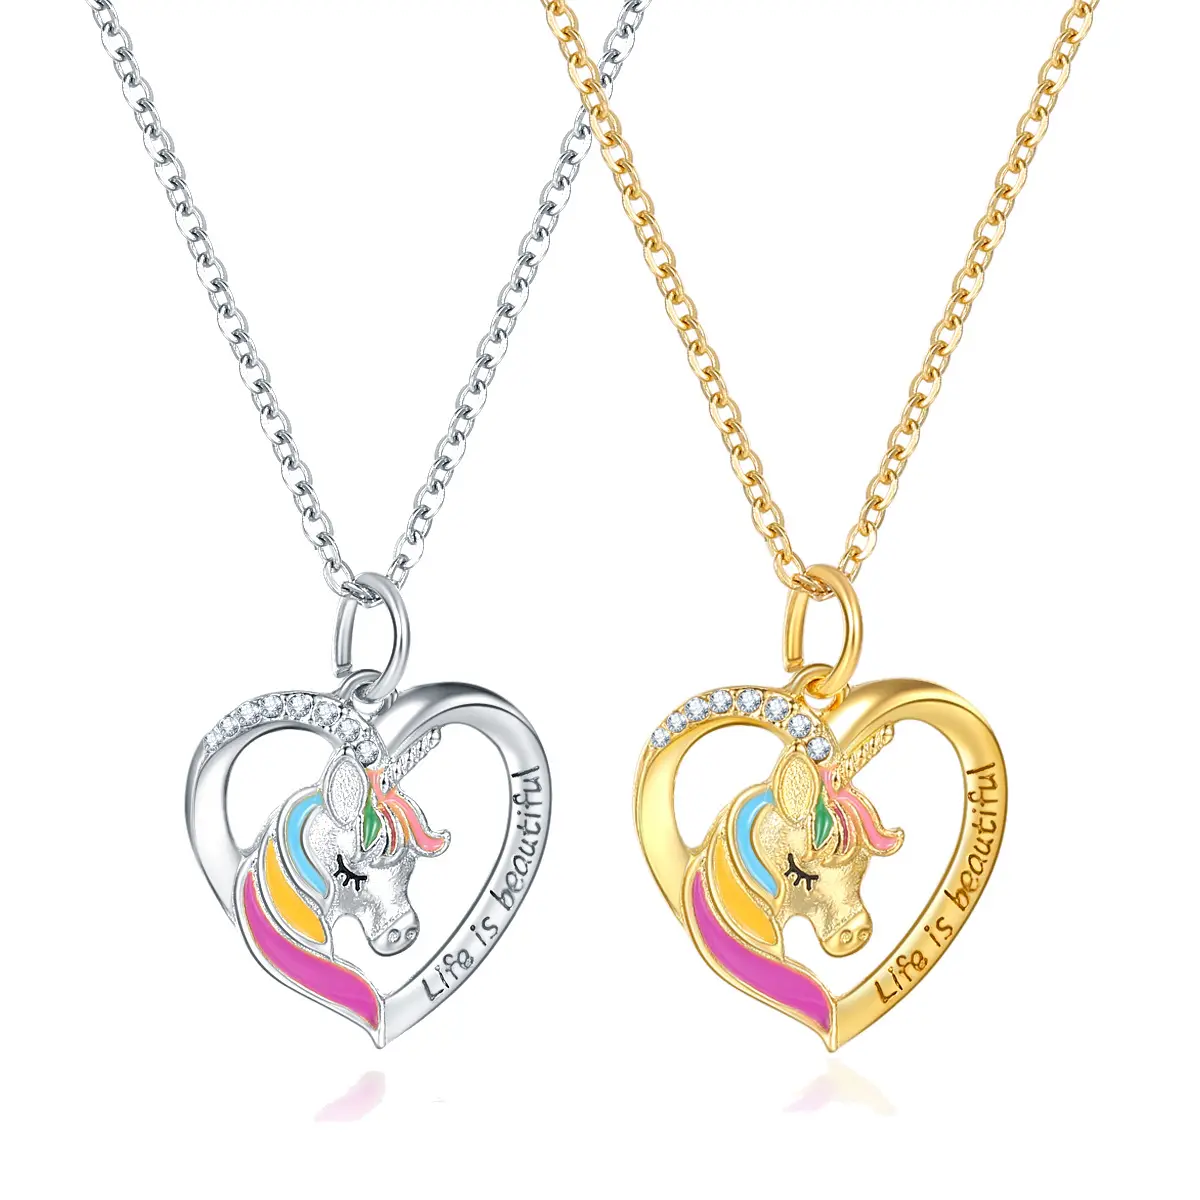 Enamel Rainbow Unicorn Necklace Alloy Stainless Steel Unicorn Clavicle Pendant Necklace For Girls Kids Cute Horse Jewelry